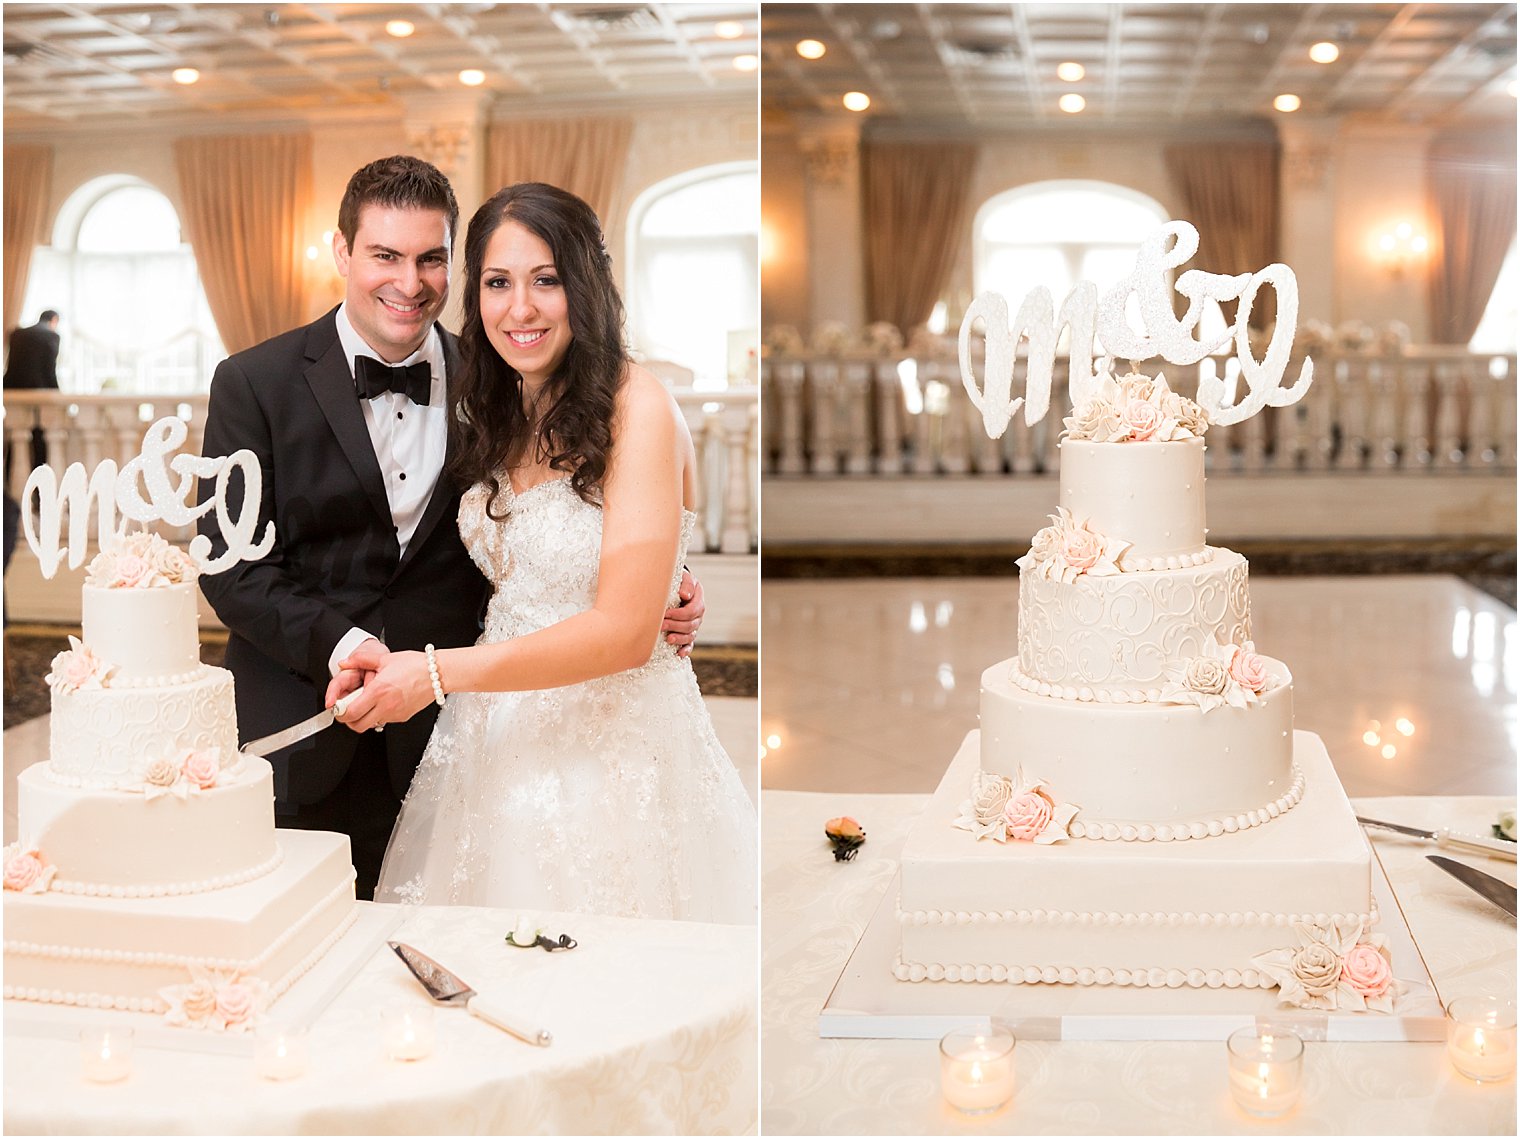 Bride and Groom cutting cake from Palermo's Bakery | Idalia Photography